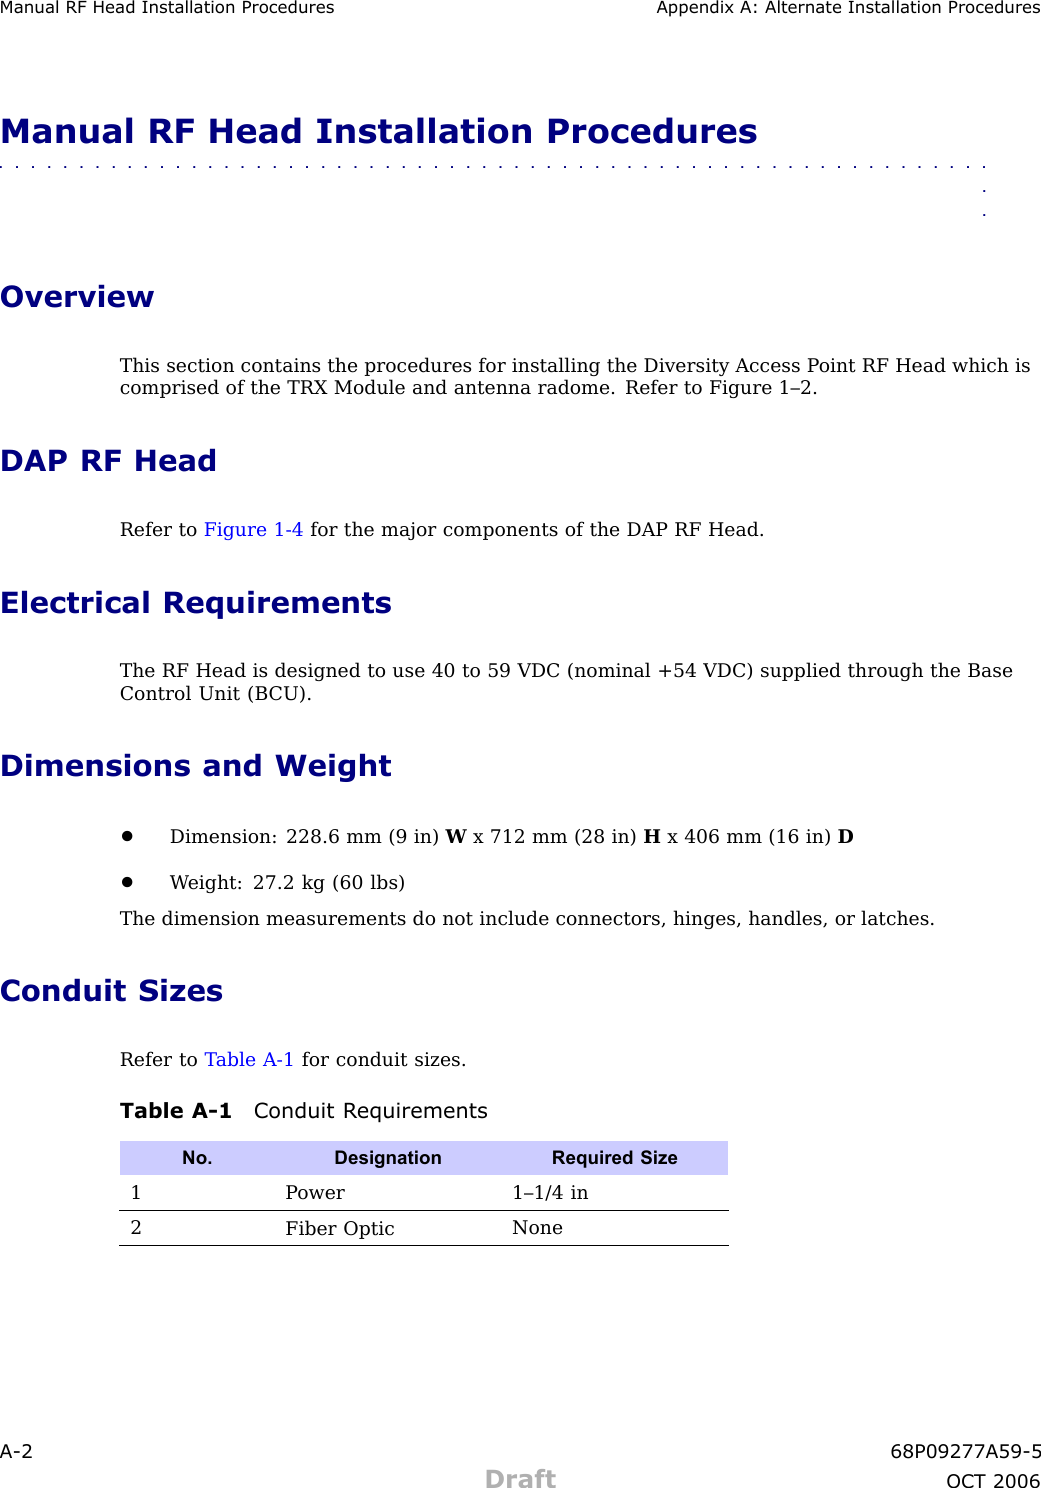 Manual RF Head Installation Procedures Appendix A: Alternate Installation ProceduresManual RF Head Installation Procedures■■■■■■■■■■■■■■■■■■■■■■■■■■■■■■■■■■■■■■■■■■■■■■■■■■■■■■■■■■■■■■■■OverviewThis section contains the procedures for installing the Diversity Access P oint RF Head which iscomprised of the TRX Module and antenna radome. Refer to Figure 1–2.DAP RF HeadRefer to Figure 1 -4 for the major components of the DAP RF Head.Electrical RequirementsThe RF Head is designed to use 40 to 59 VDC (nominal +54 VDC) supplied through the BaseControl Unit (B CU).Dimensions and Weight•Dimension: 228.6 mm (9 in) Wx 712 mm (28 in) Hx 406 mm (16 in) D•W eight: 27.2 kg (60 lbs)The dimension measurements do not include connectors, hinges, handles, or latches.Conduit SizesRefer to T able A -1 for conduit sizes.Table A -1 Conduit R equirementsNo. DesignationRequired Size1P ower1–1/4 in2Fiber OpticNoneA -2 68P09277A59 -5Draft OCT 2006